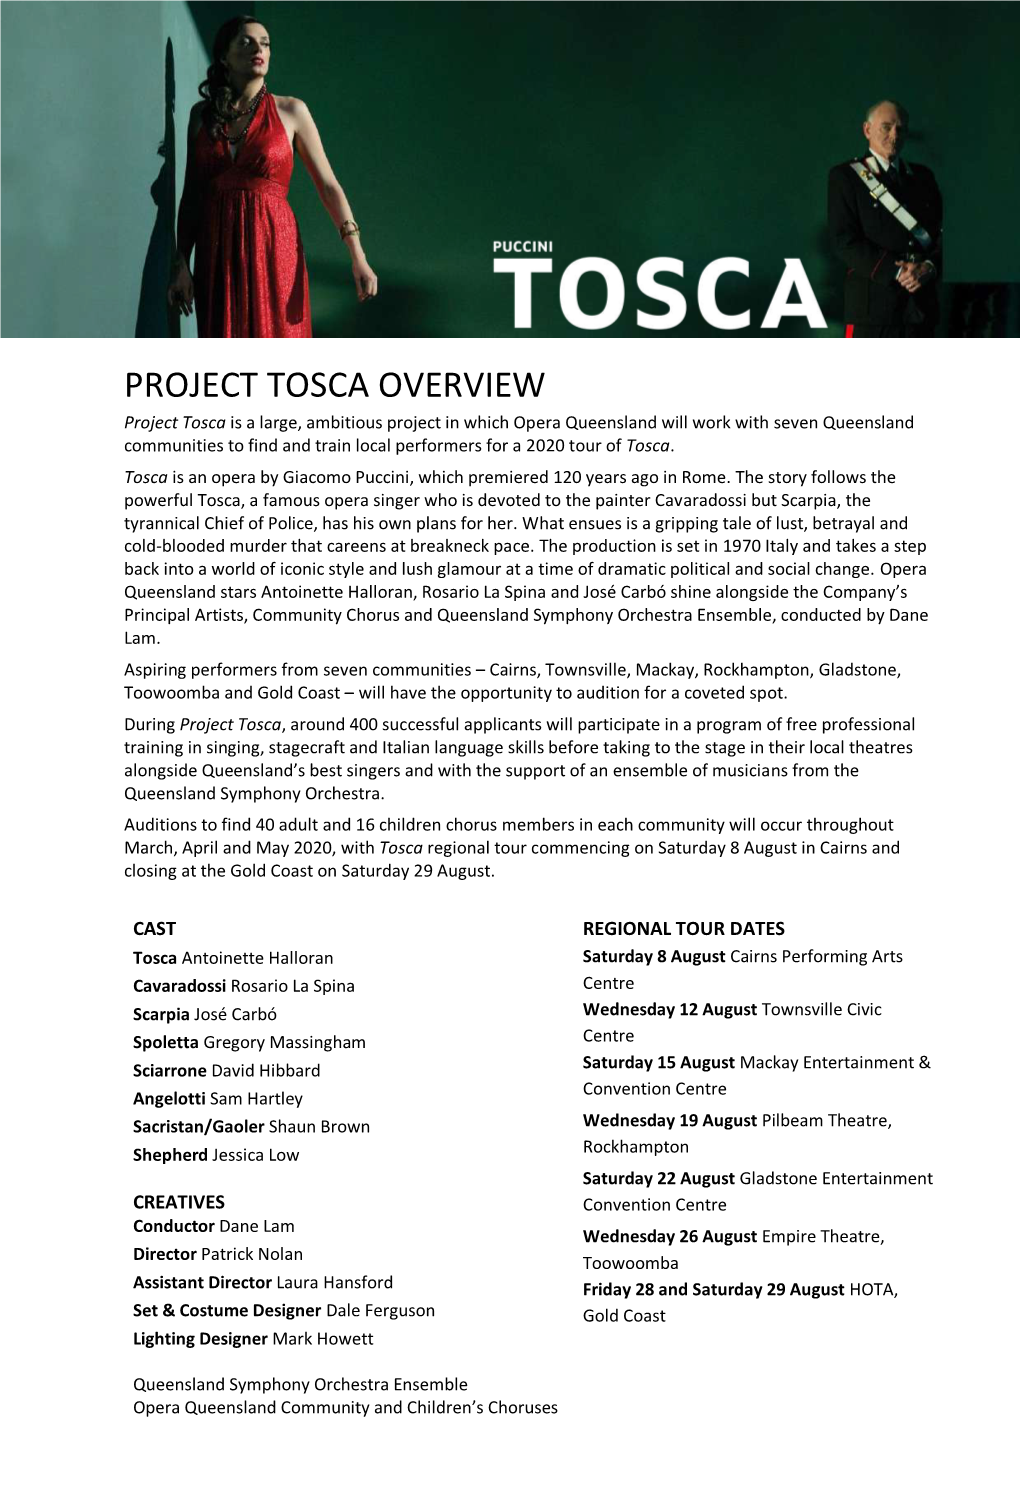 Project Tosca Overview